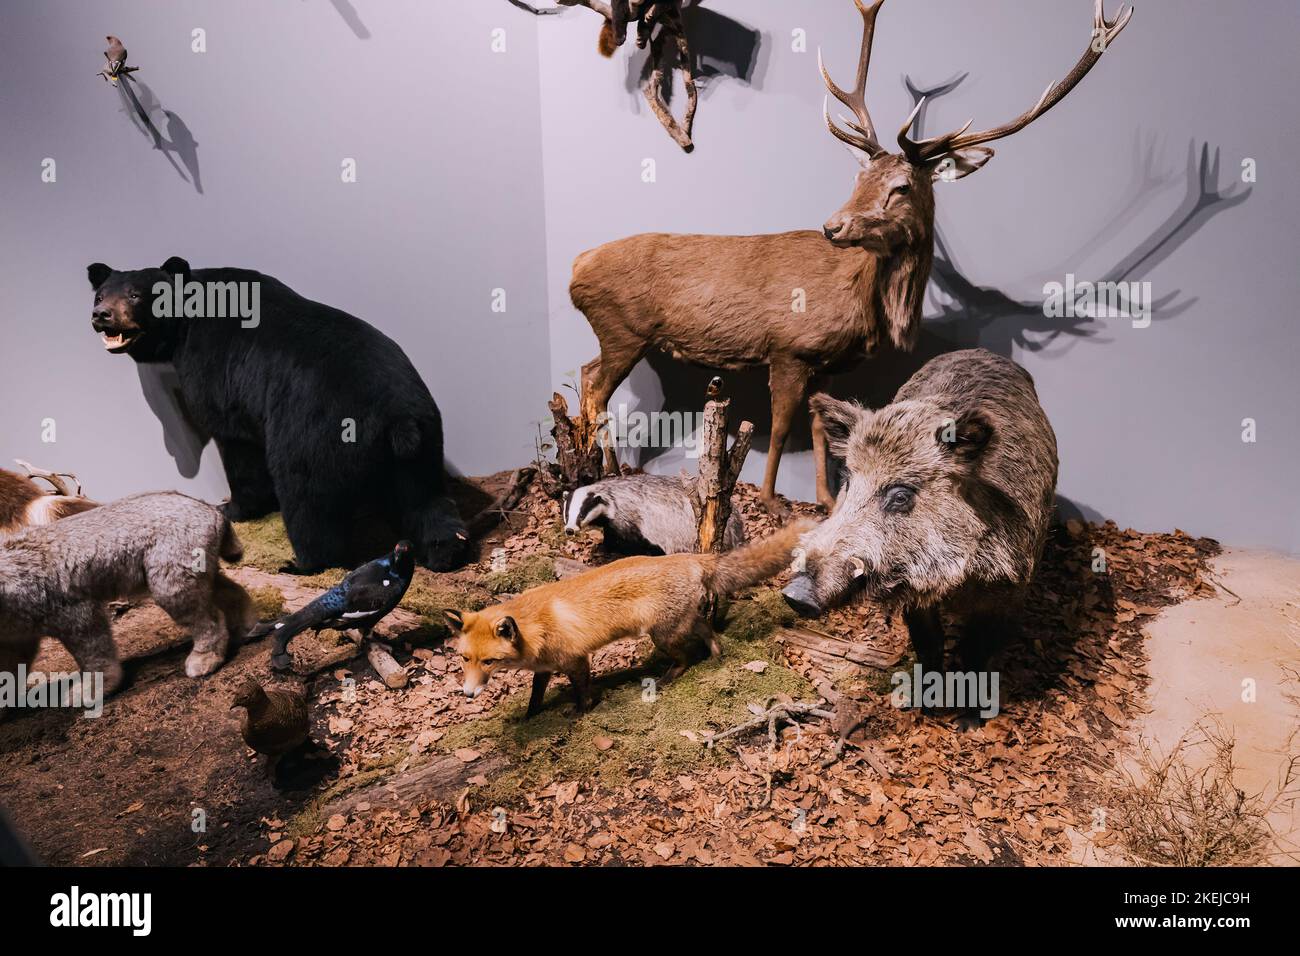 26 July 2022, Munster, Germany: A lot of scary stuffed animals in the hall of the Museum of Natural History Stock Photo